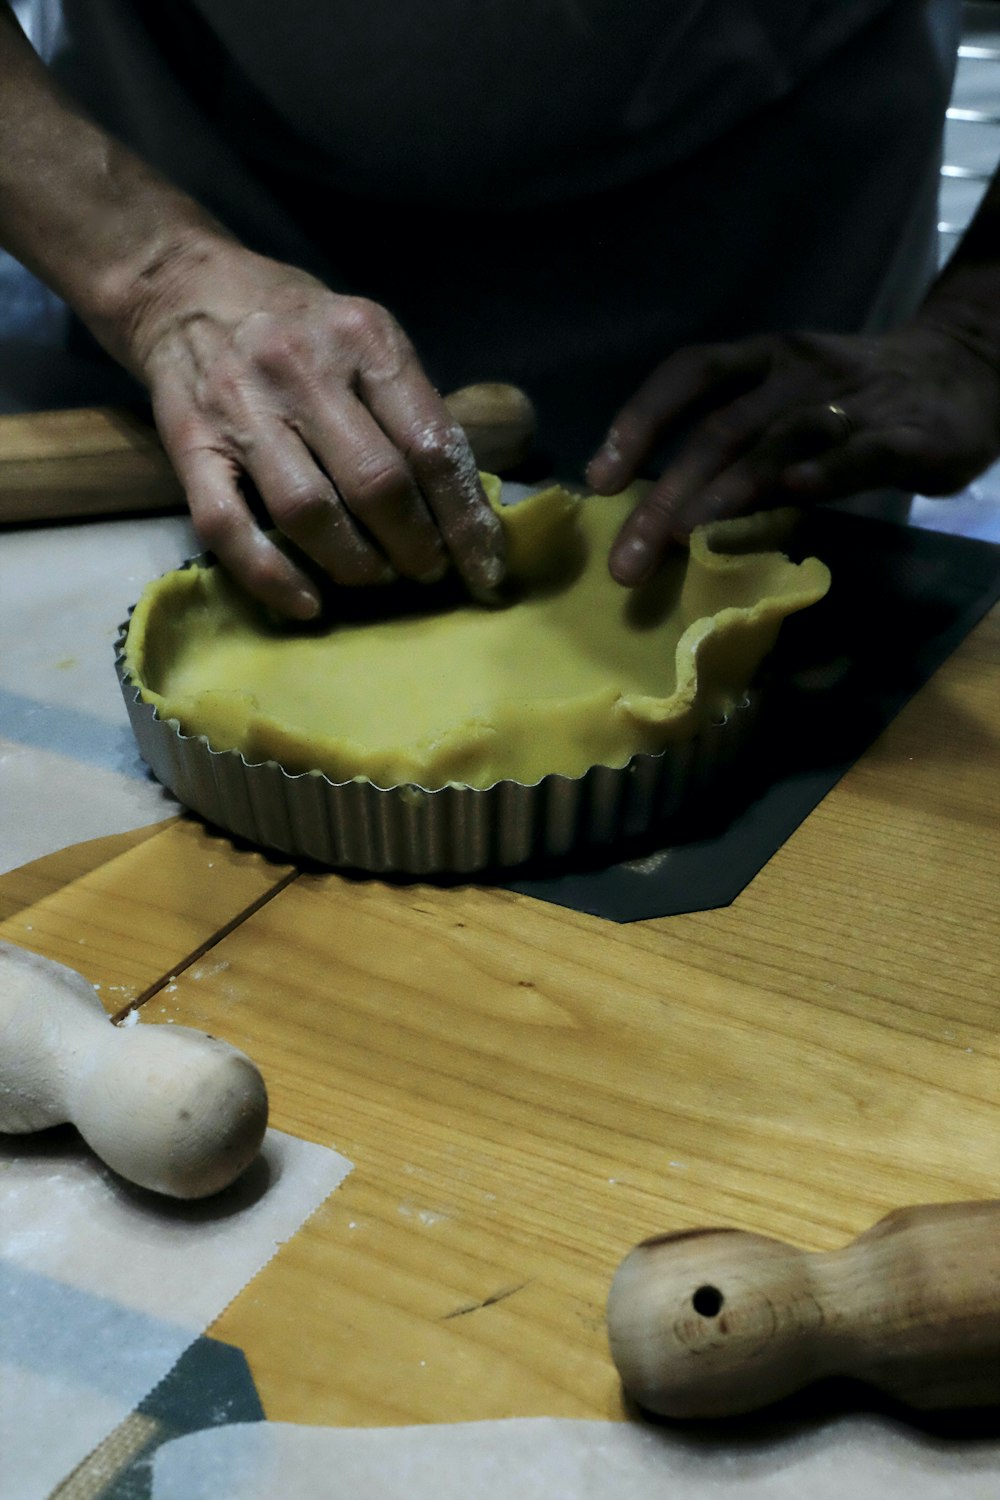 a person is making a pie on a table